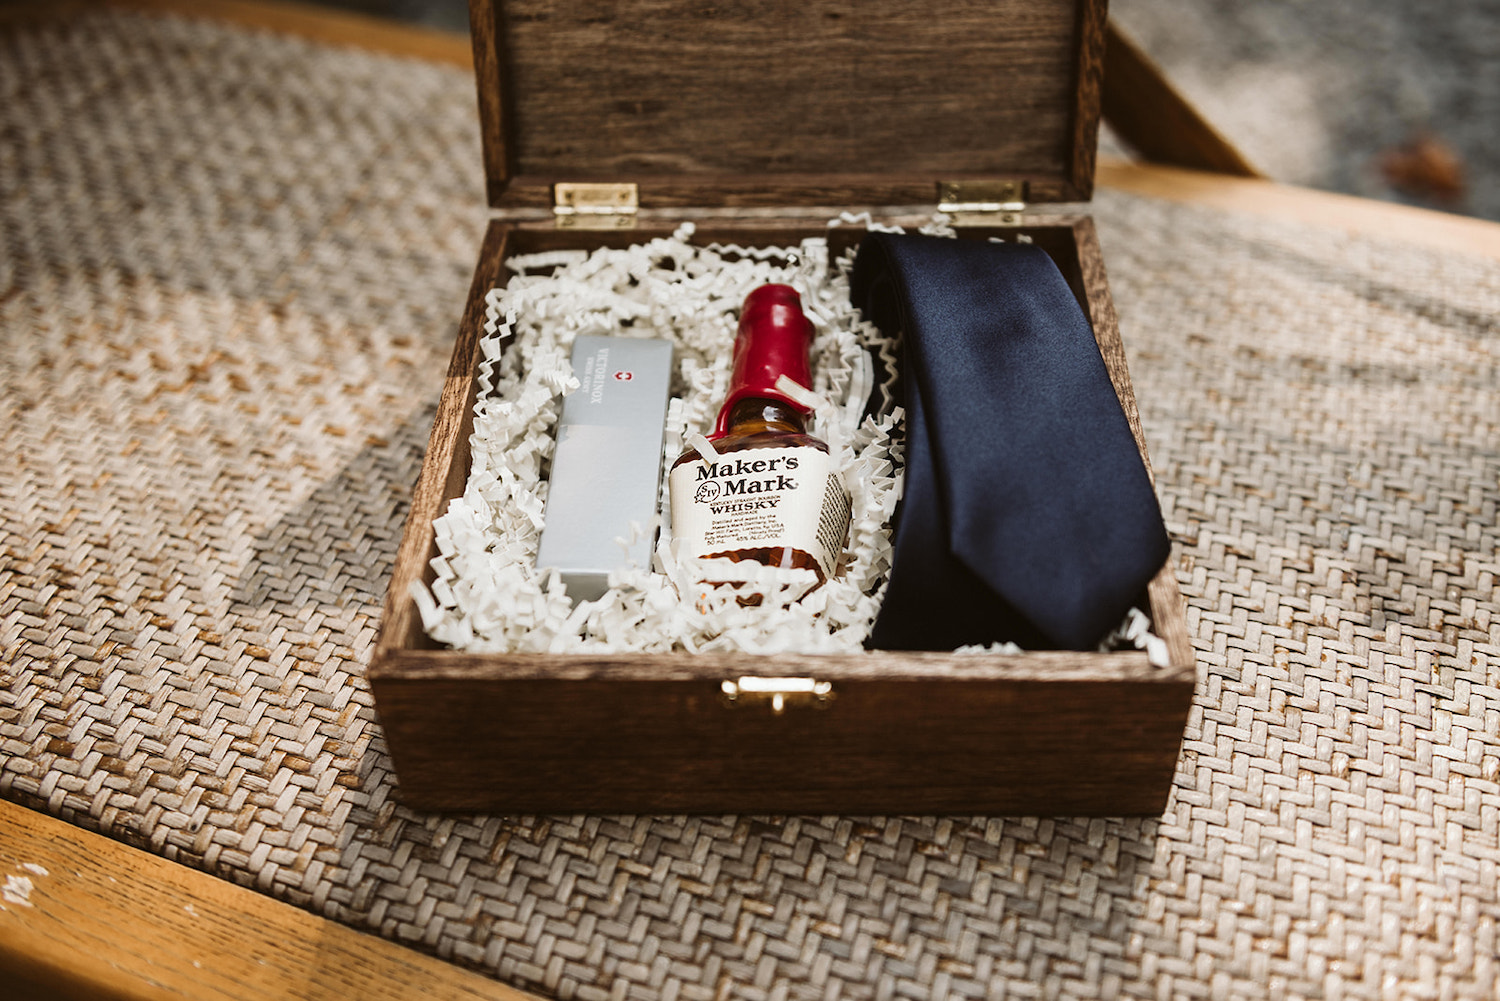 wooden box with lid hinged open contains a dark tie and small bottle of Makers Mark whisky